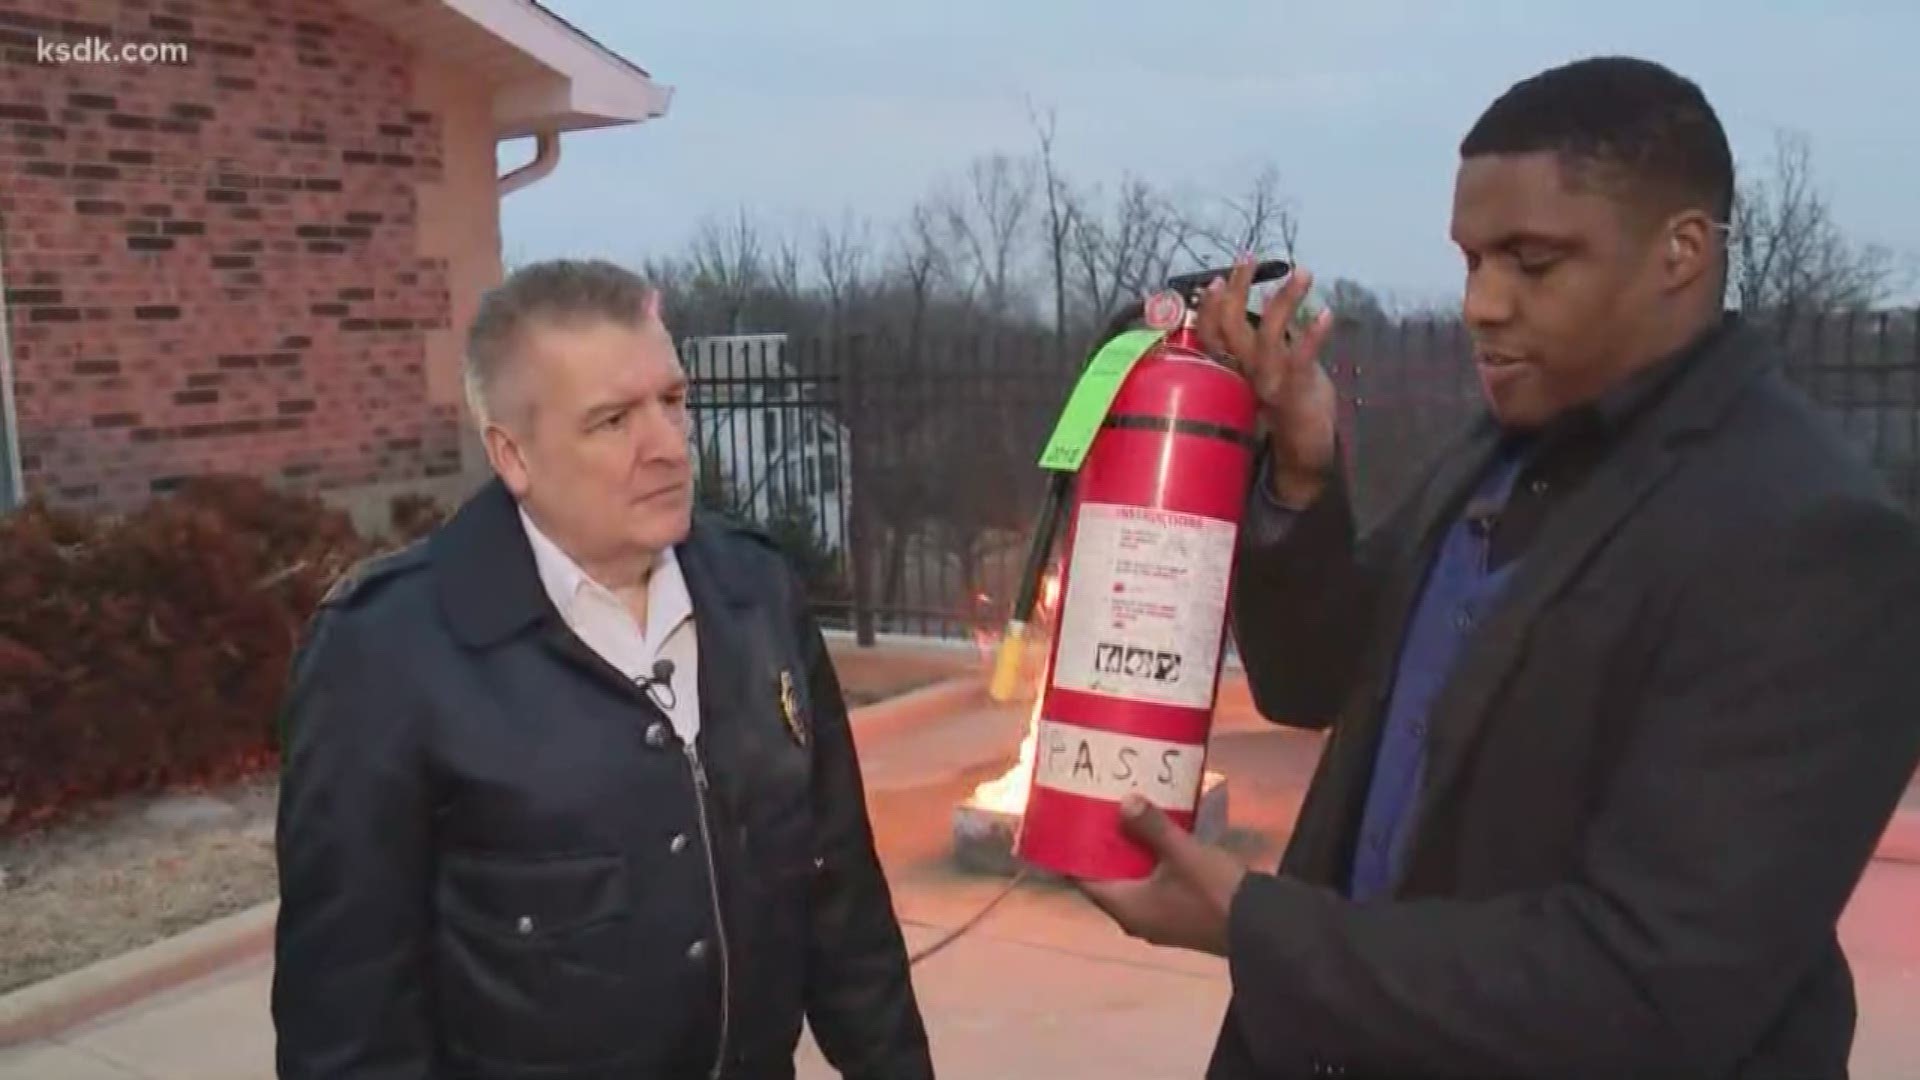 Keeping you safe in a fire: Fire extinguisher, can you use it?